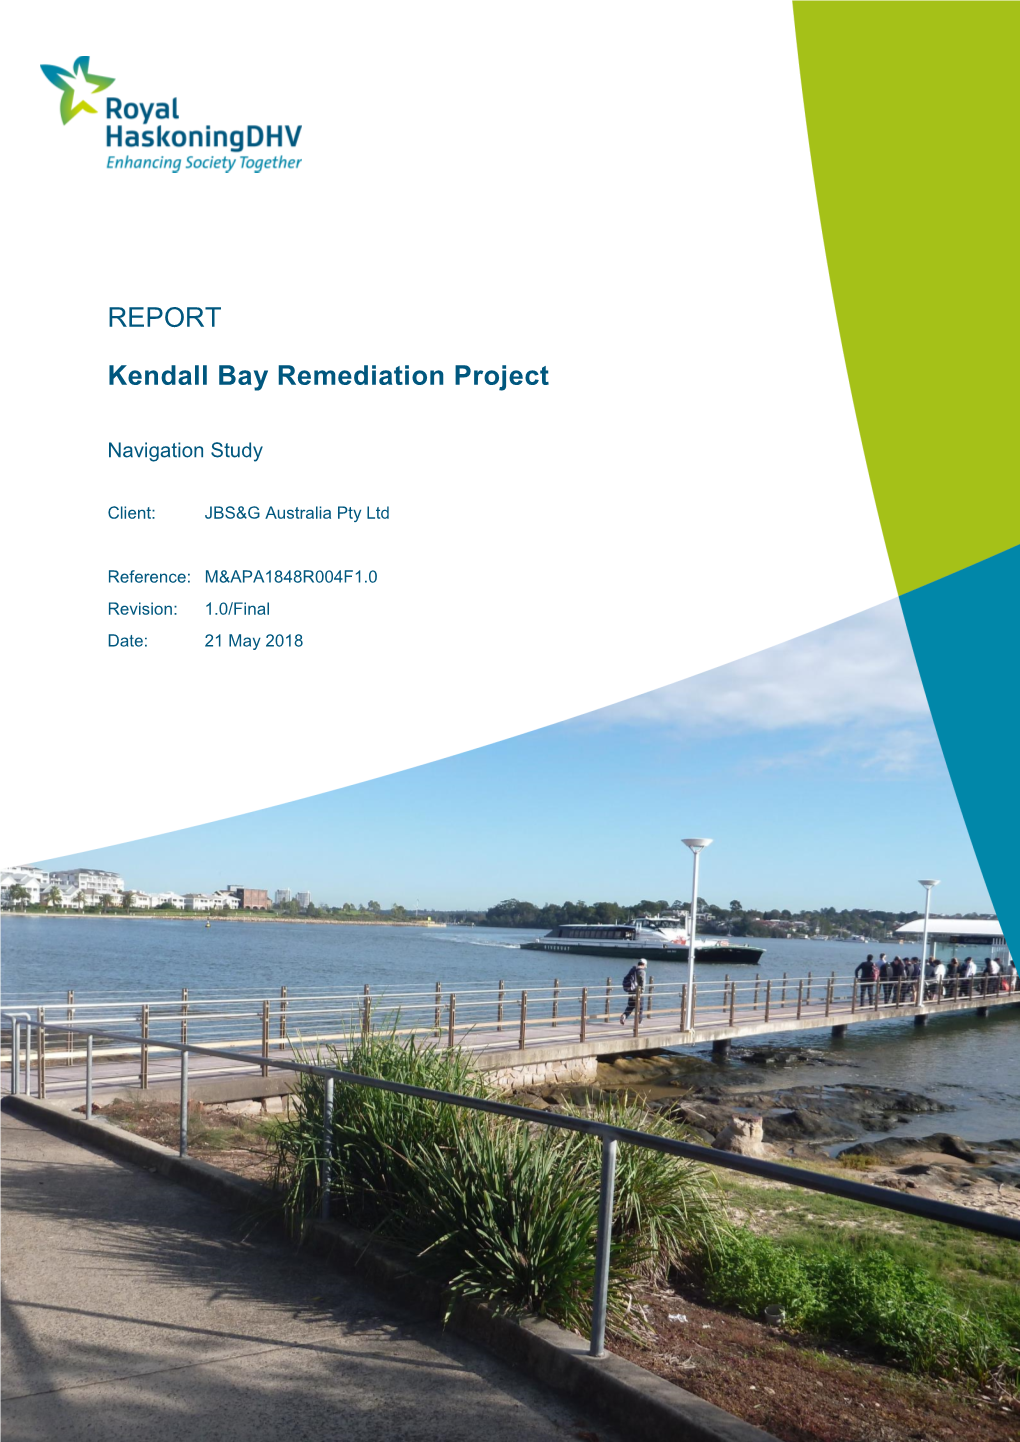 Kendall Bay Remediation Project